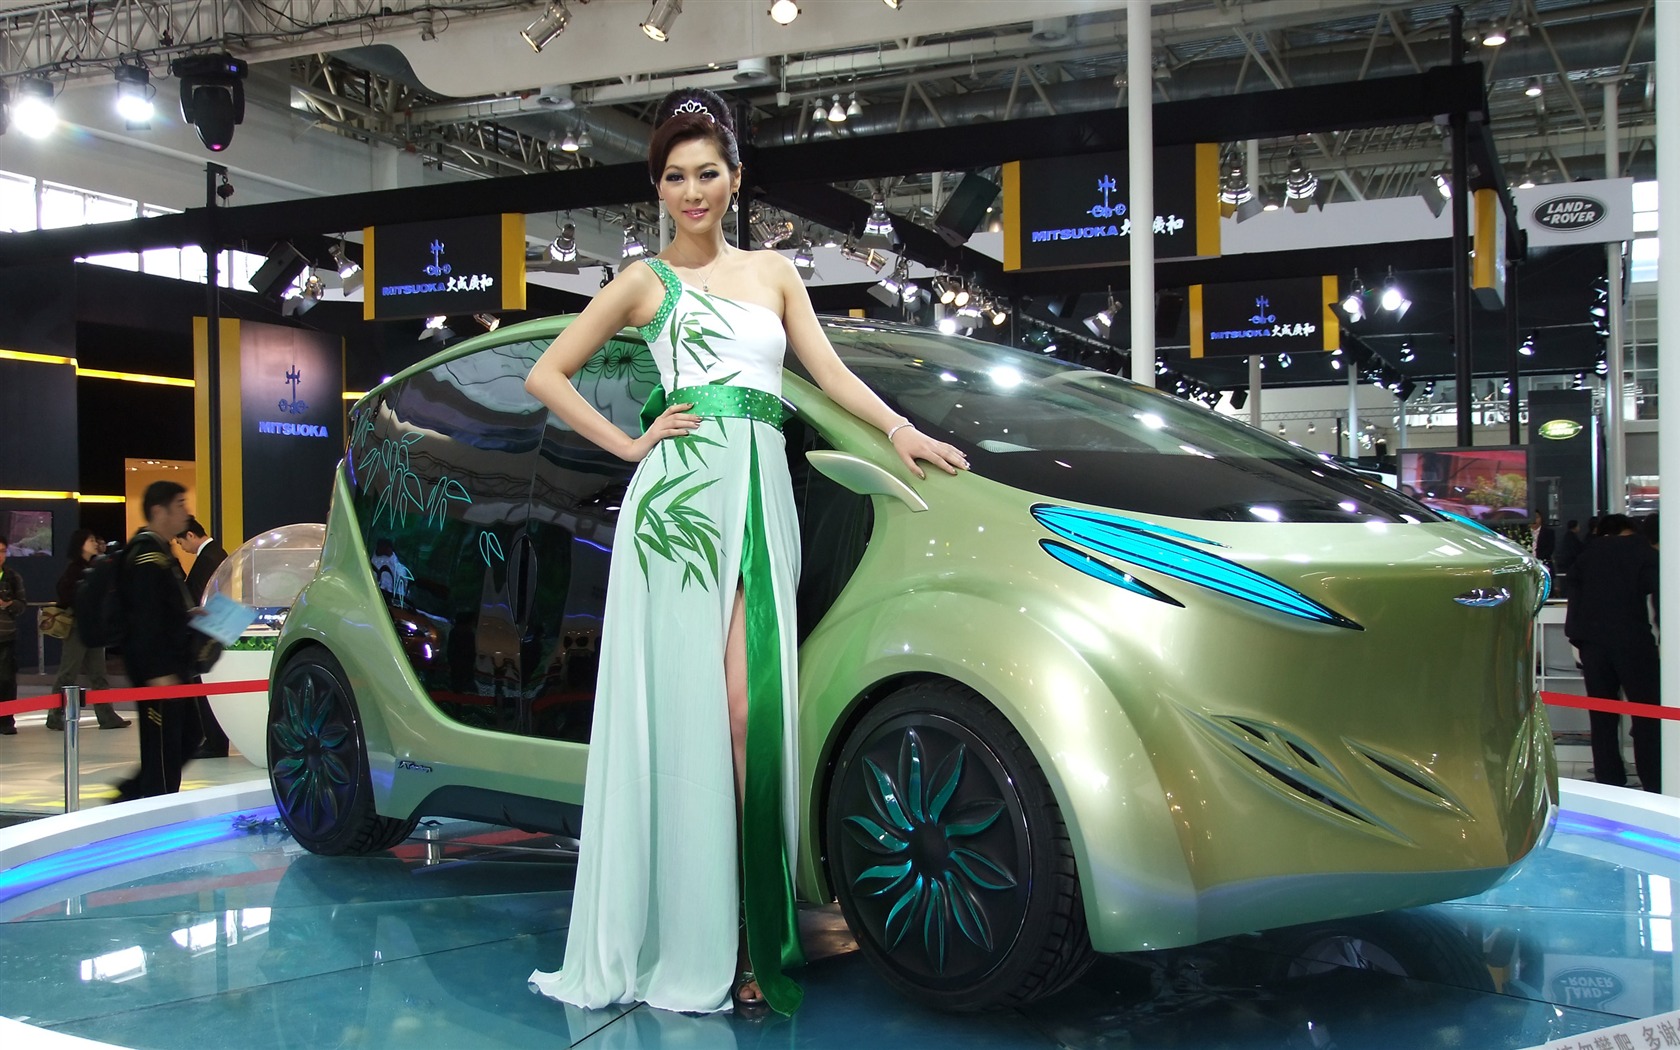 2010 Beijing Auto Show car models Collection (2) #2 - 1680x1050